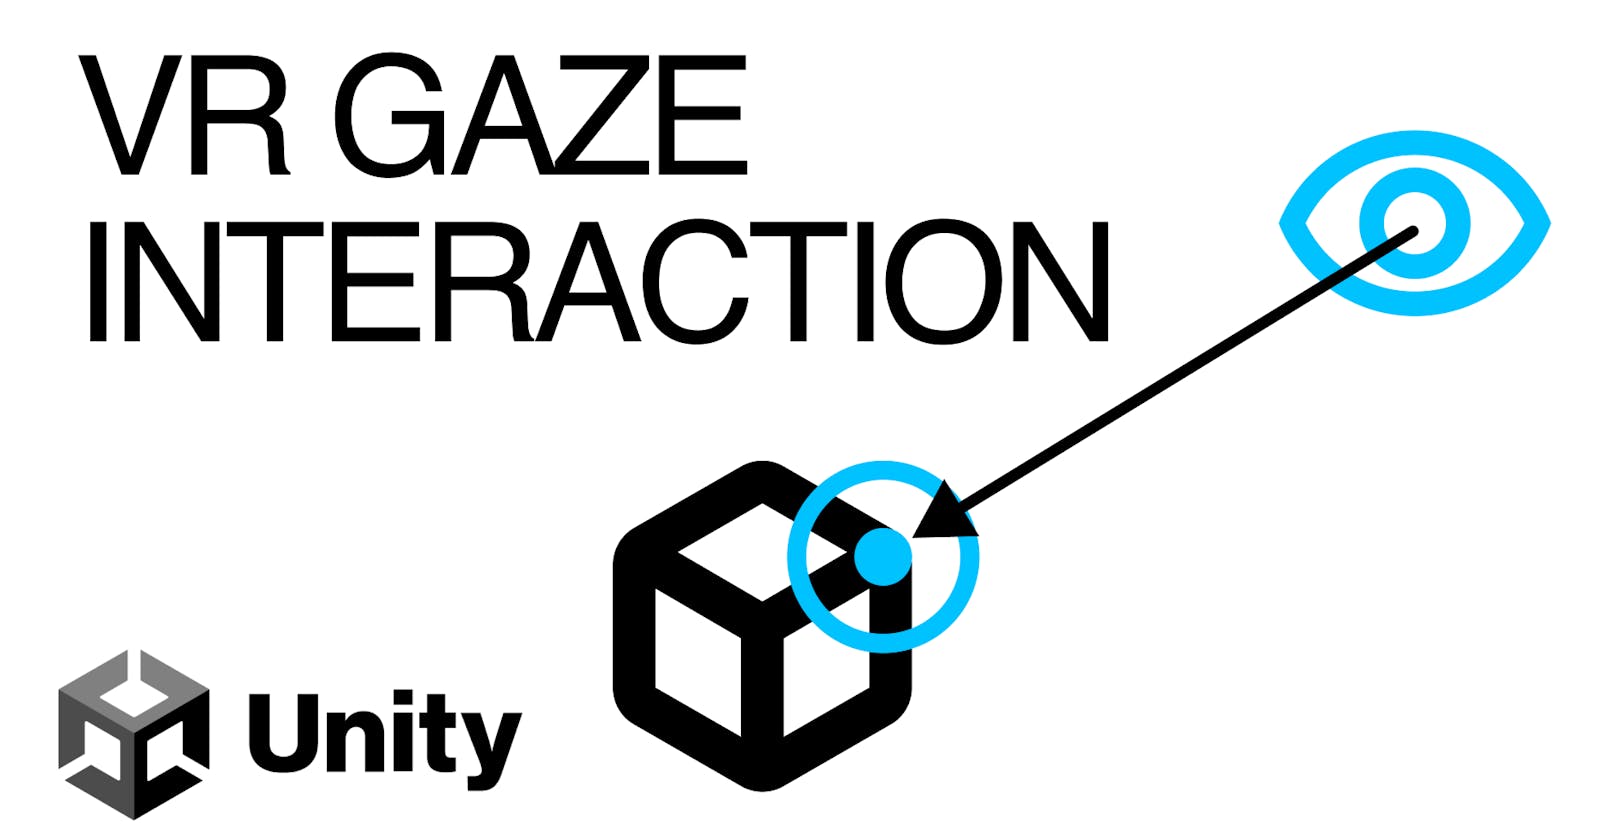 A Gaze Interaction System for VR